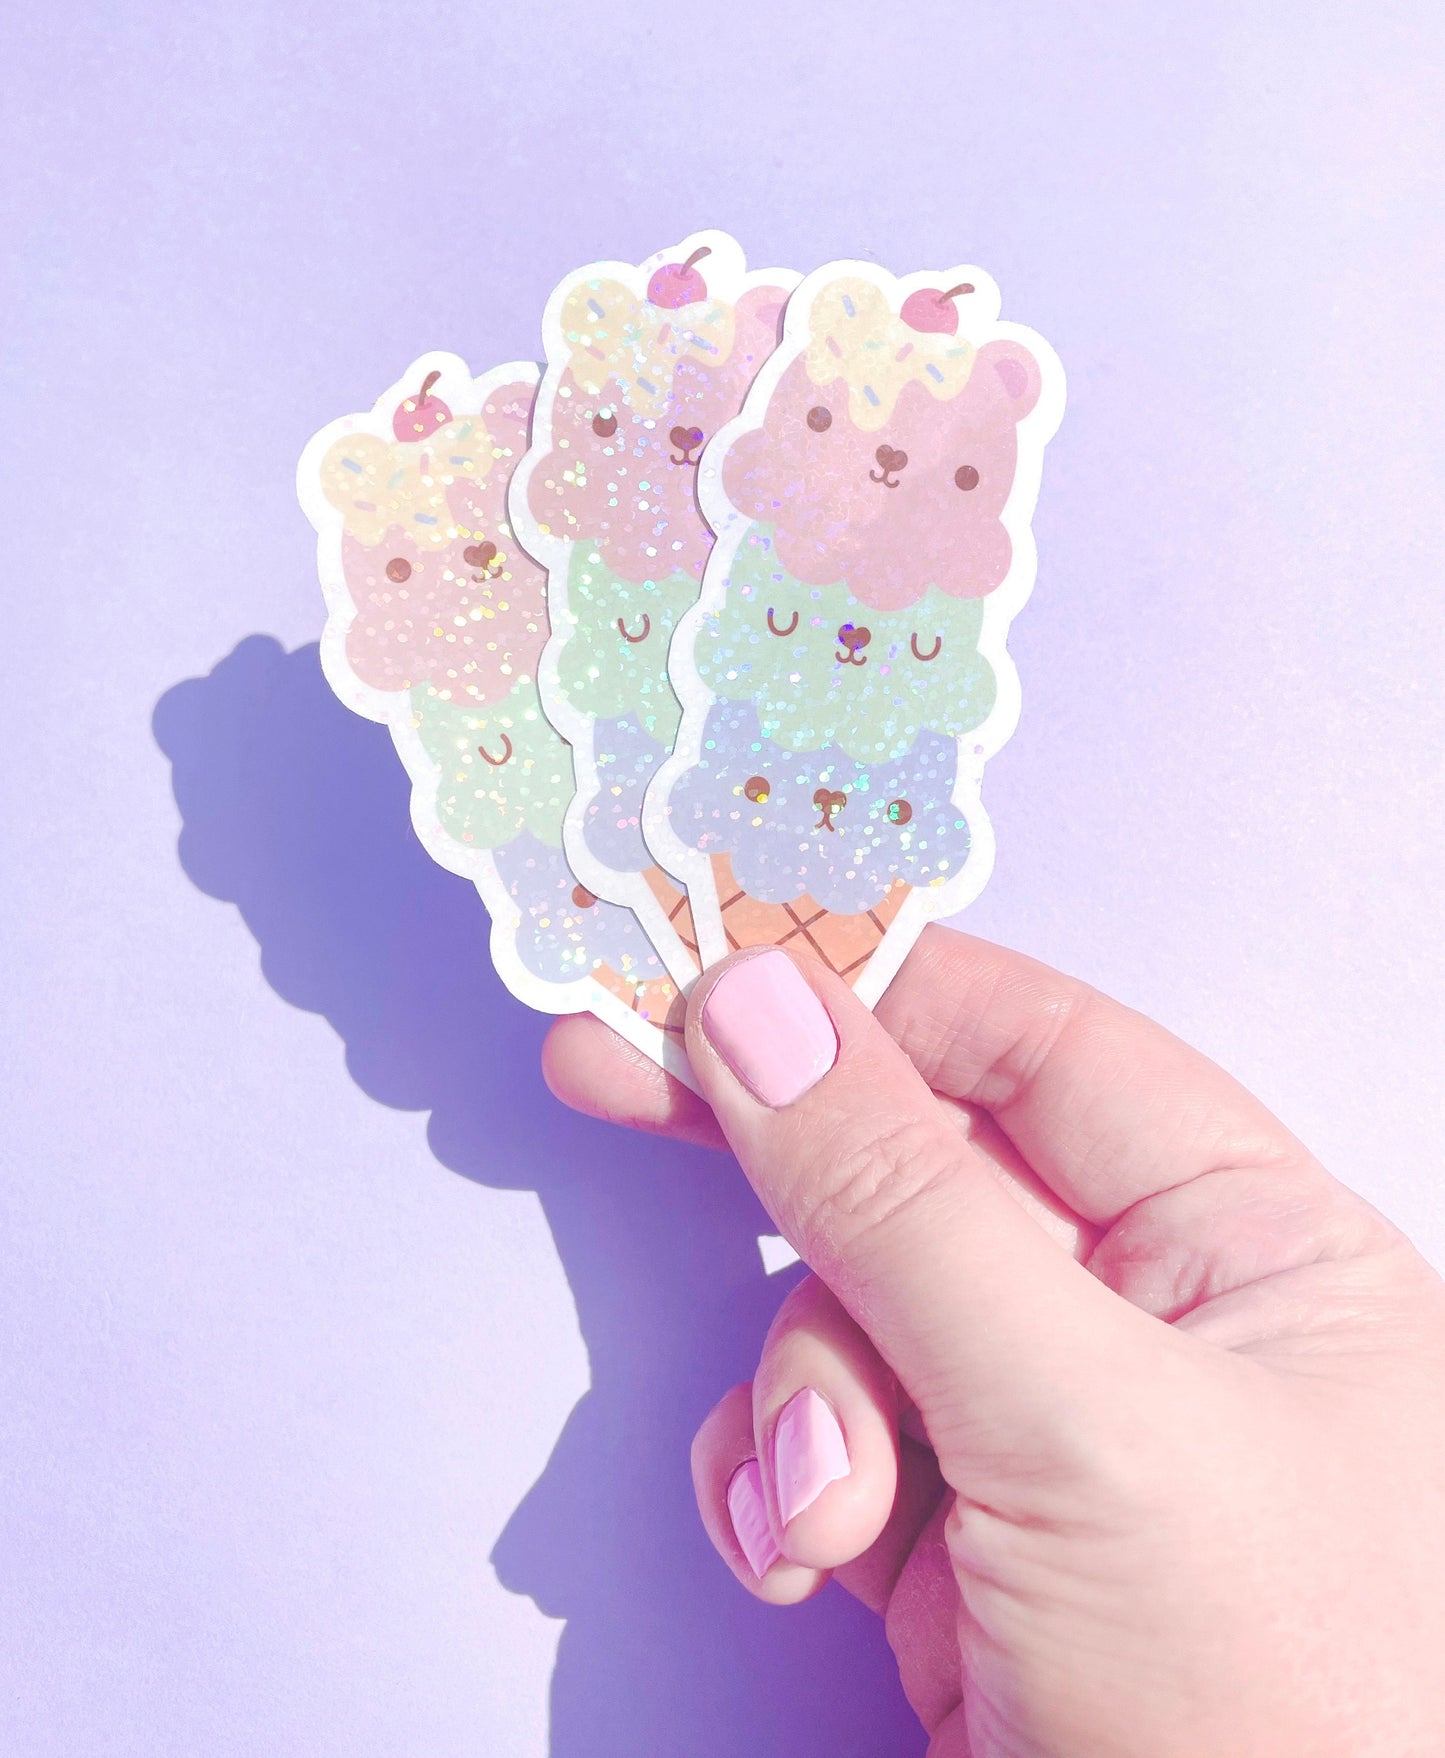 Kawaii sparkly holographic stickers Ice cream - part of the Ice Cream Dreams range UK seller